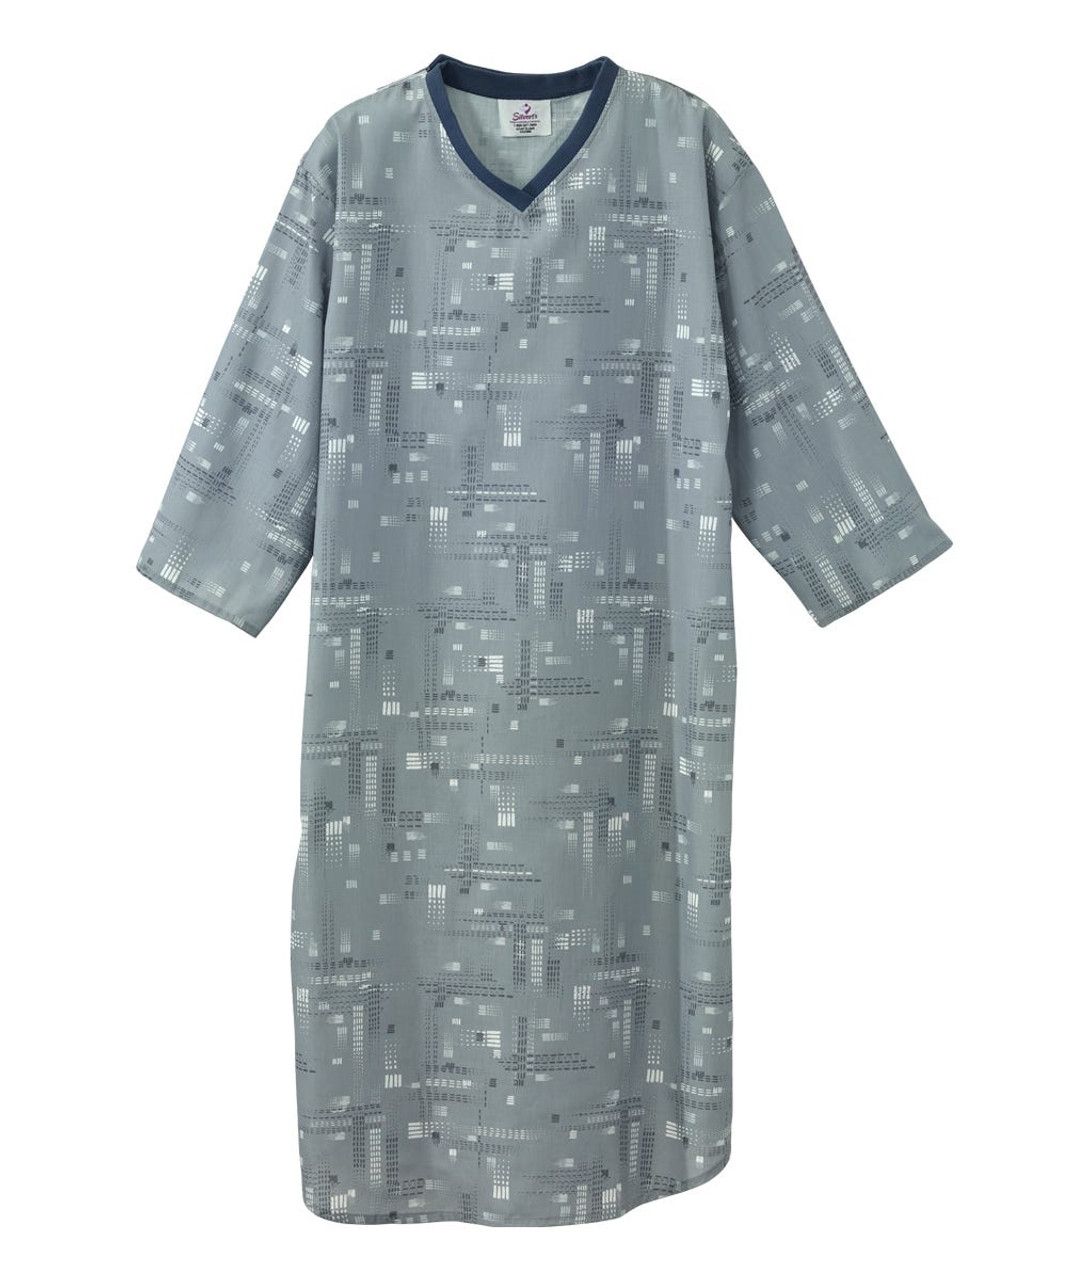 Silverts SV50050 Poly-Cotton Hospital Gowns for Men Gray/White, Size=S, SV50050-SV1295-S